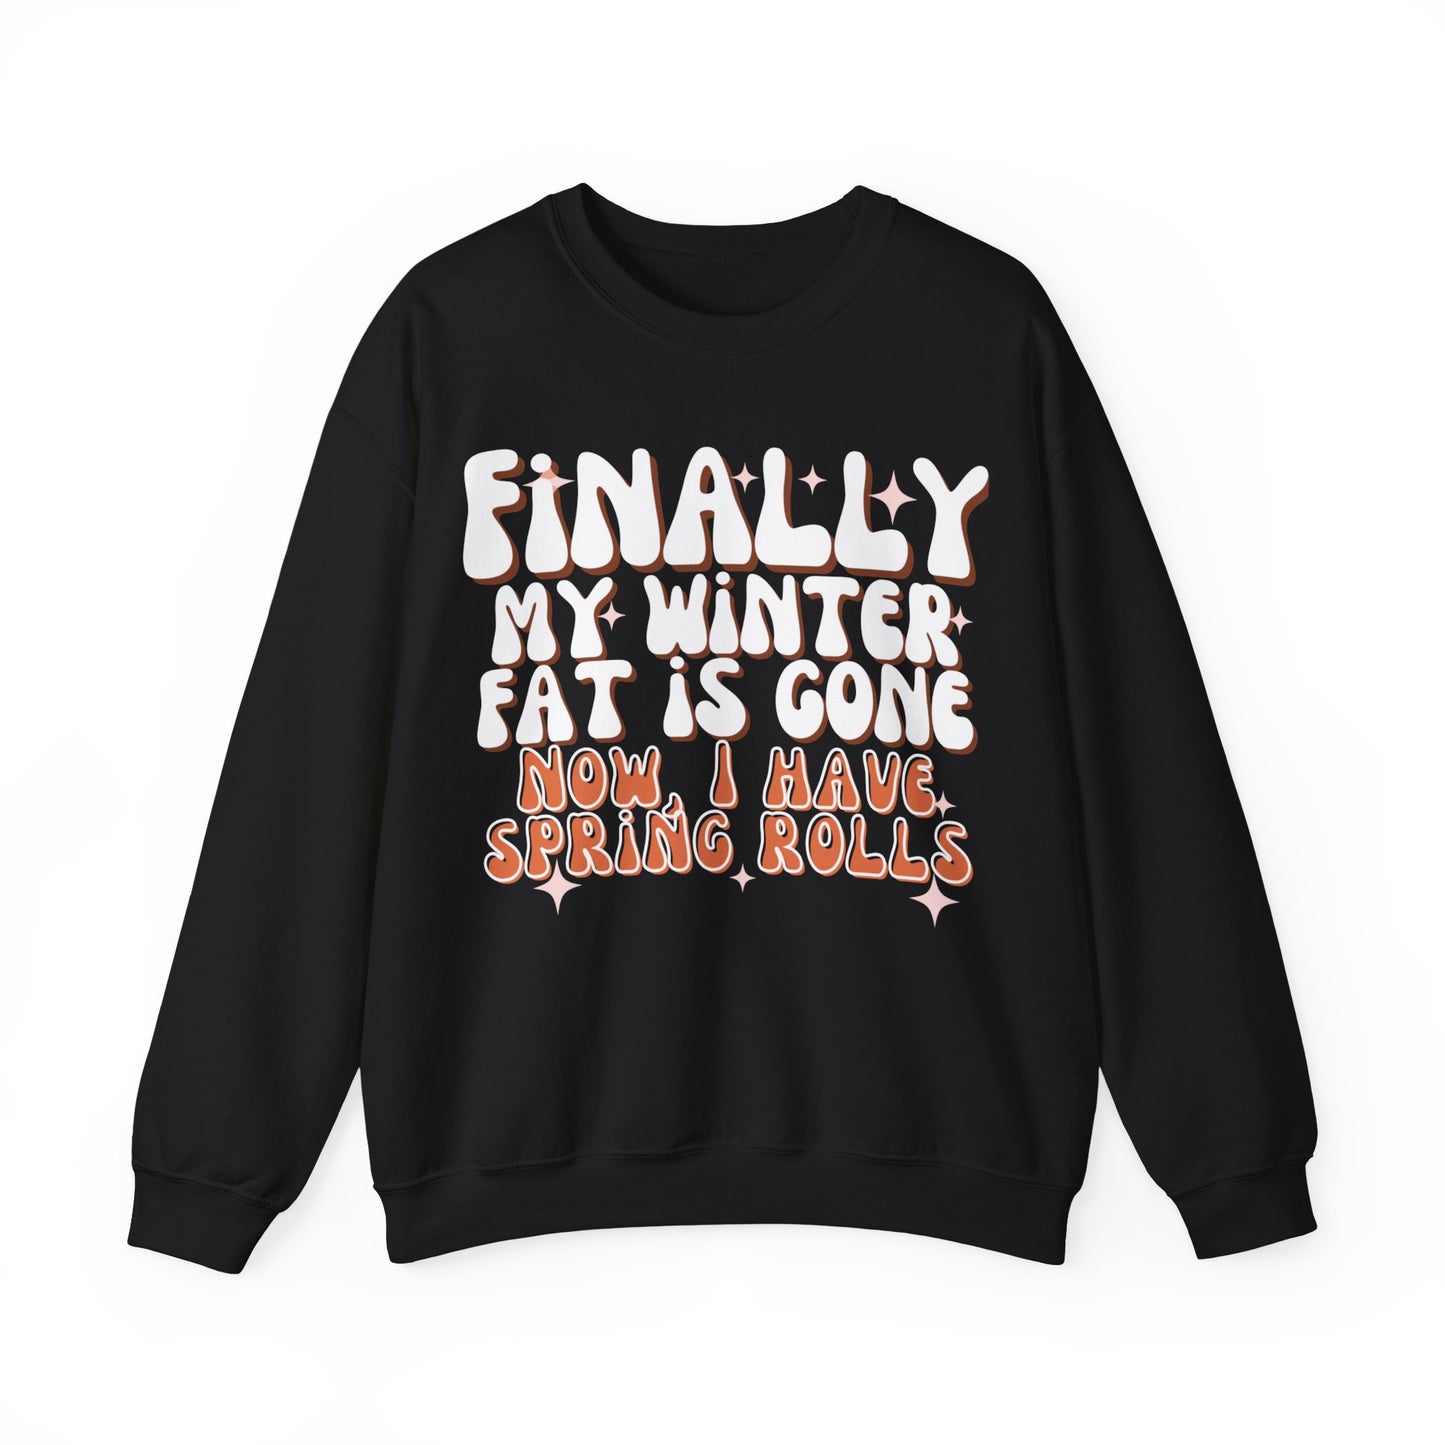 Finally, My Winter Fat Is Gone, Now I Have Spring Rolls Sweatshirt